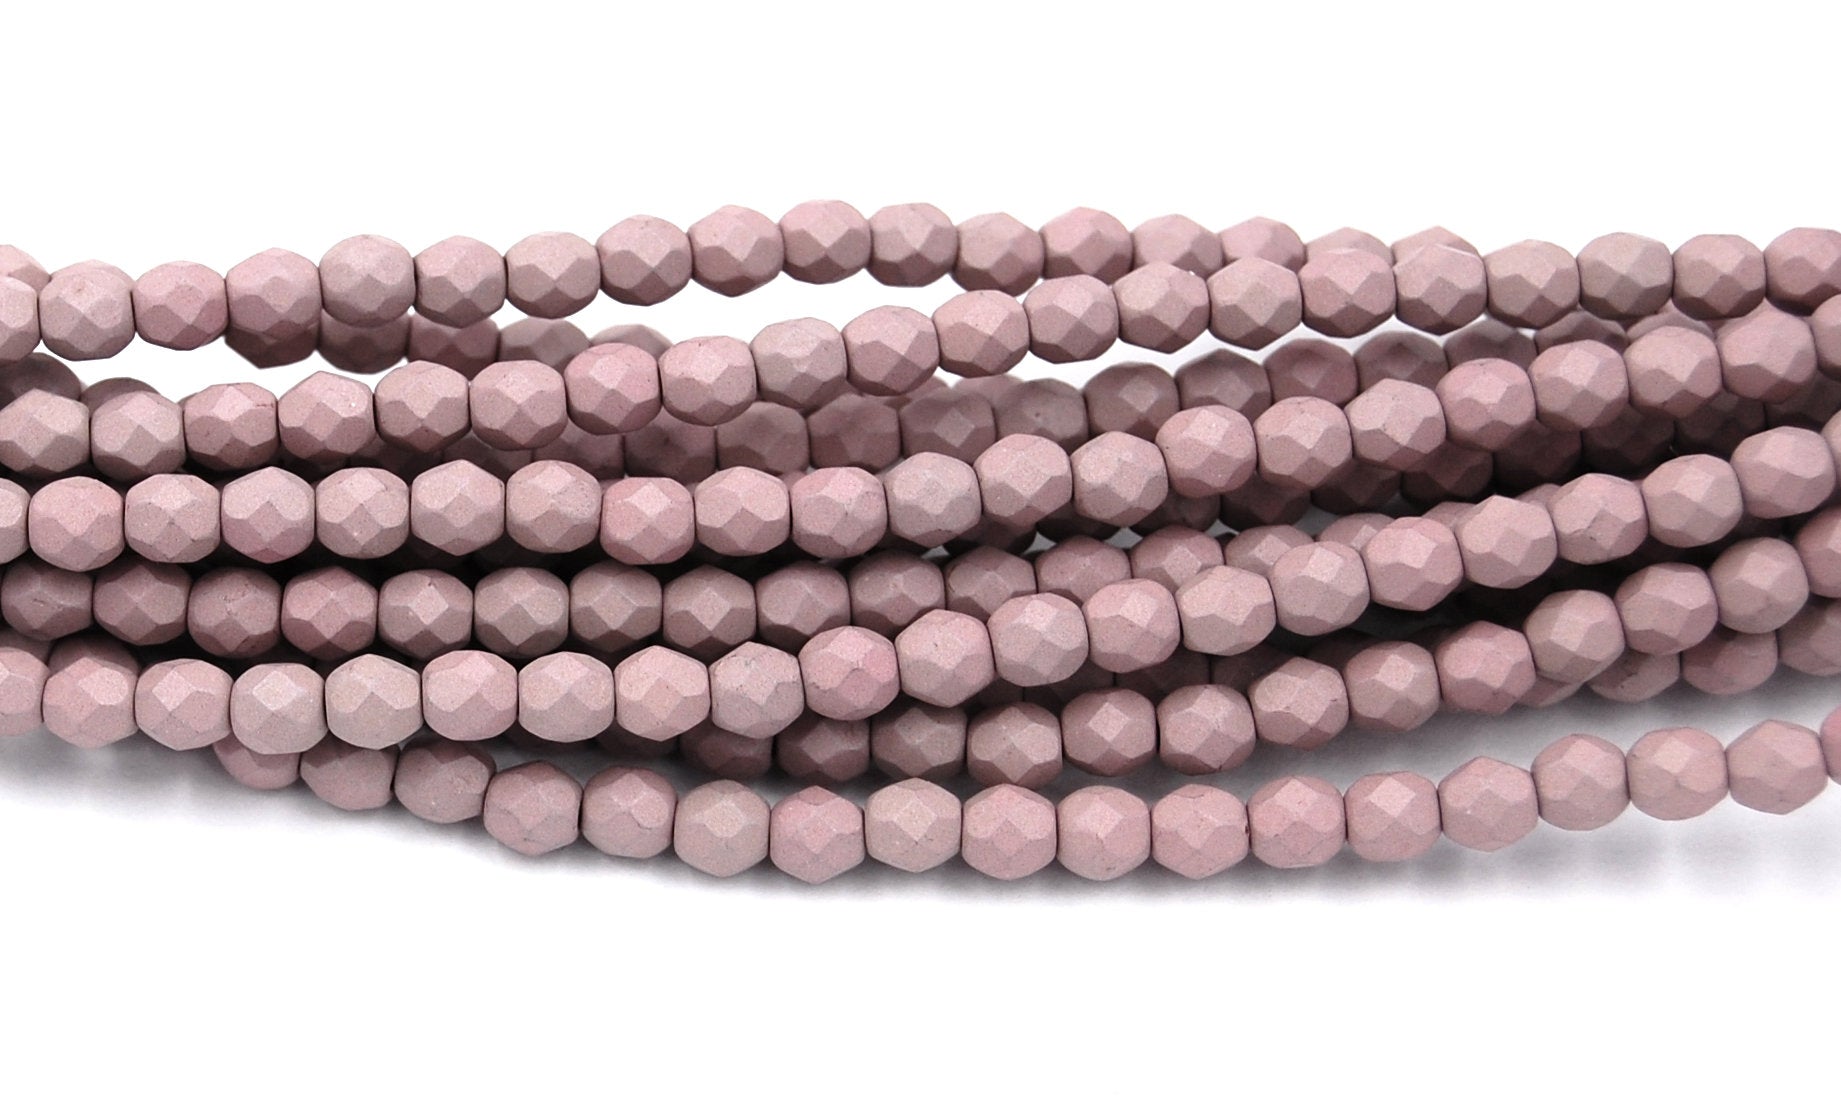 Opaque Saturated Mushroom Czech Glass Faceted Bead 4mm Round - 50 Pc